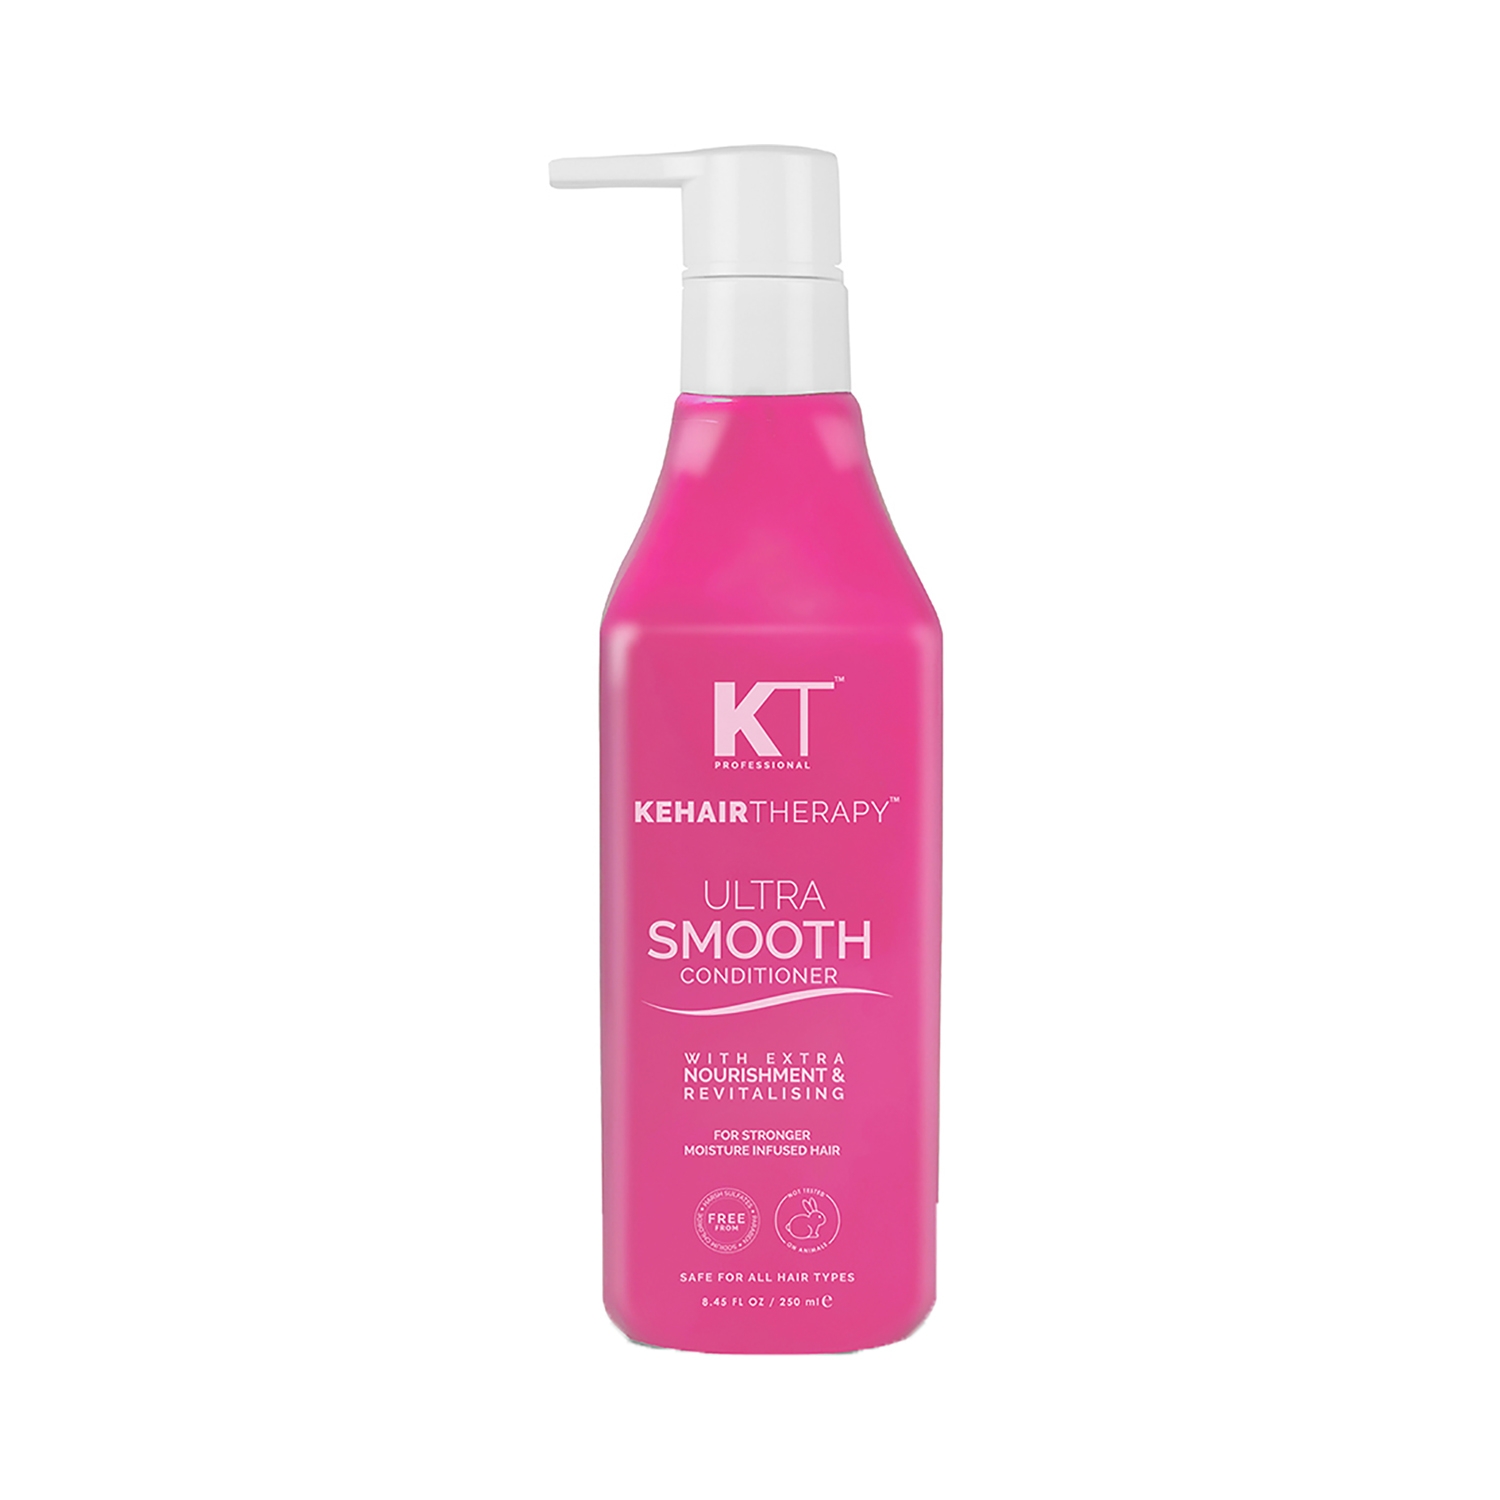 KT Professional | KT Professional Kehairtherapy Ultra Smooth Conditioner (250ml)